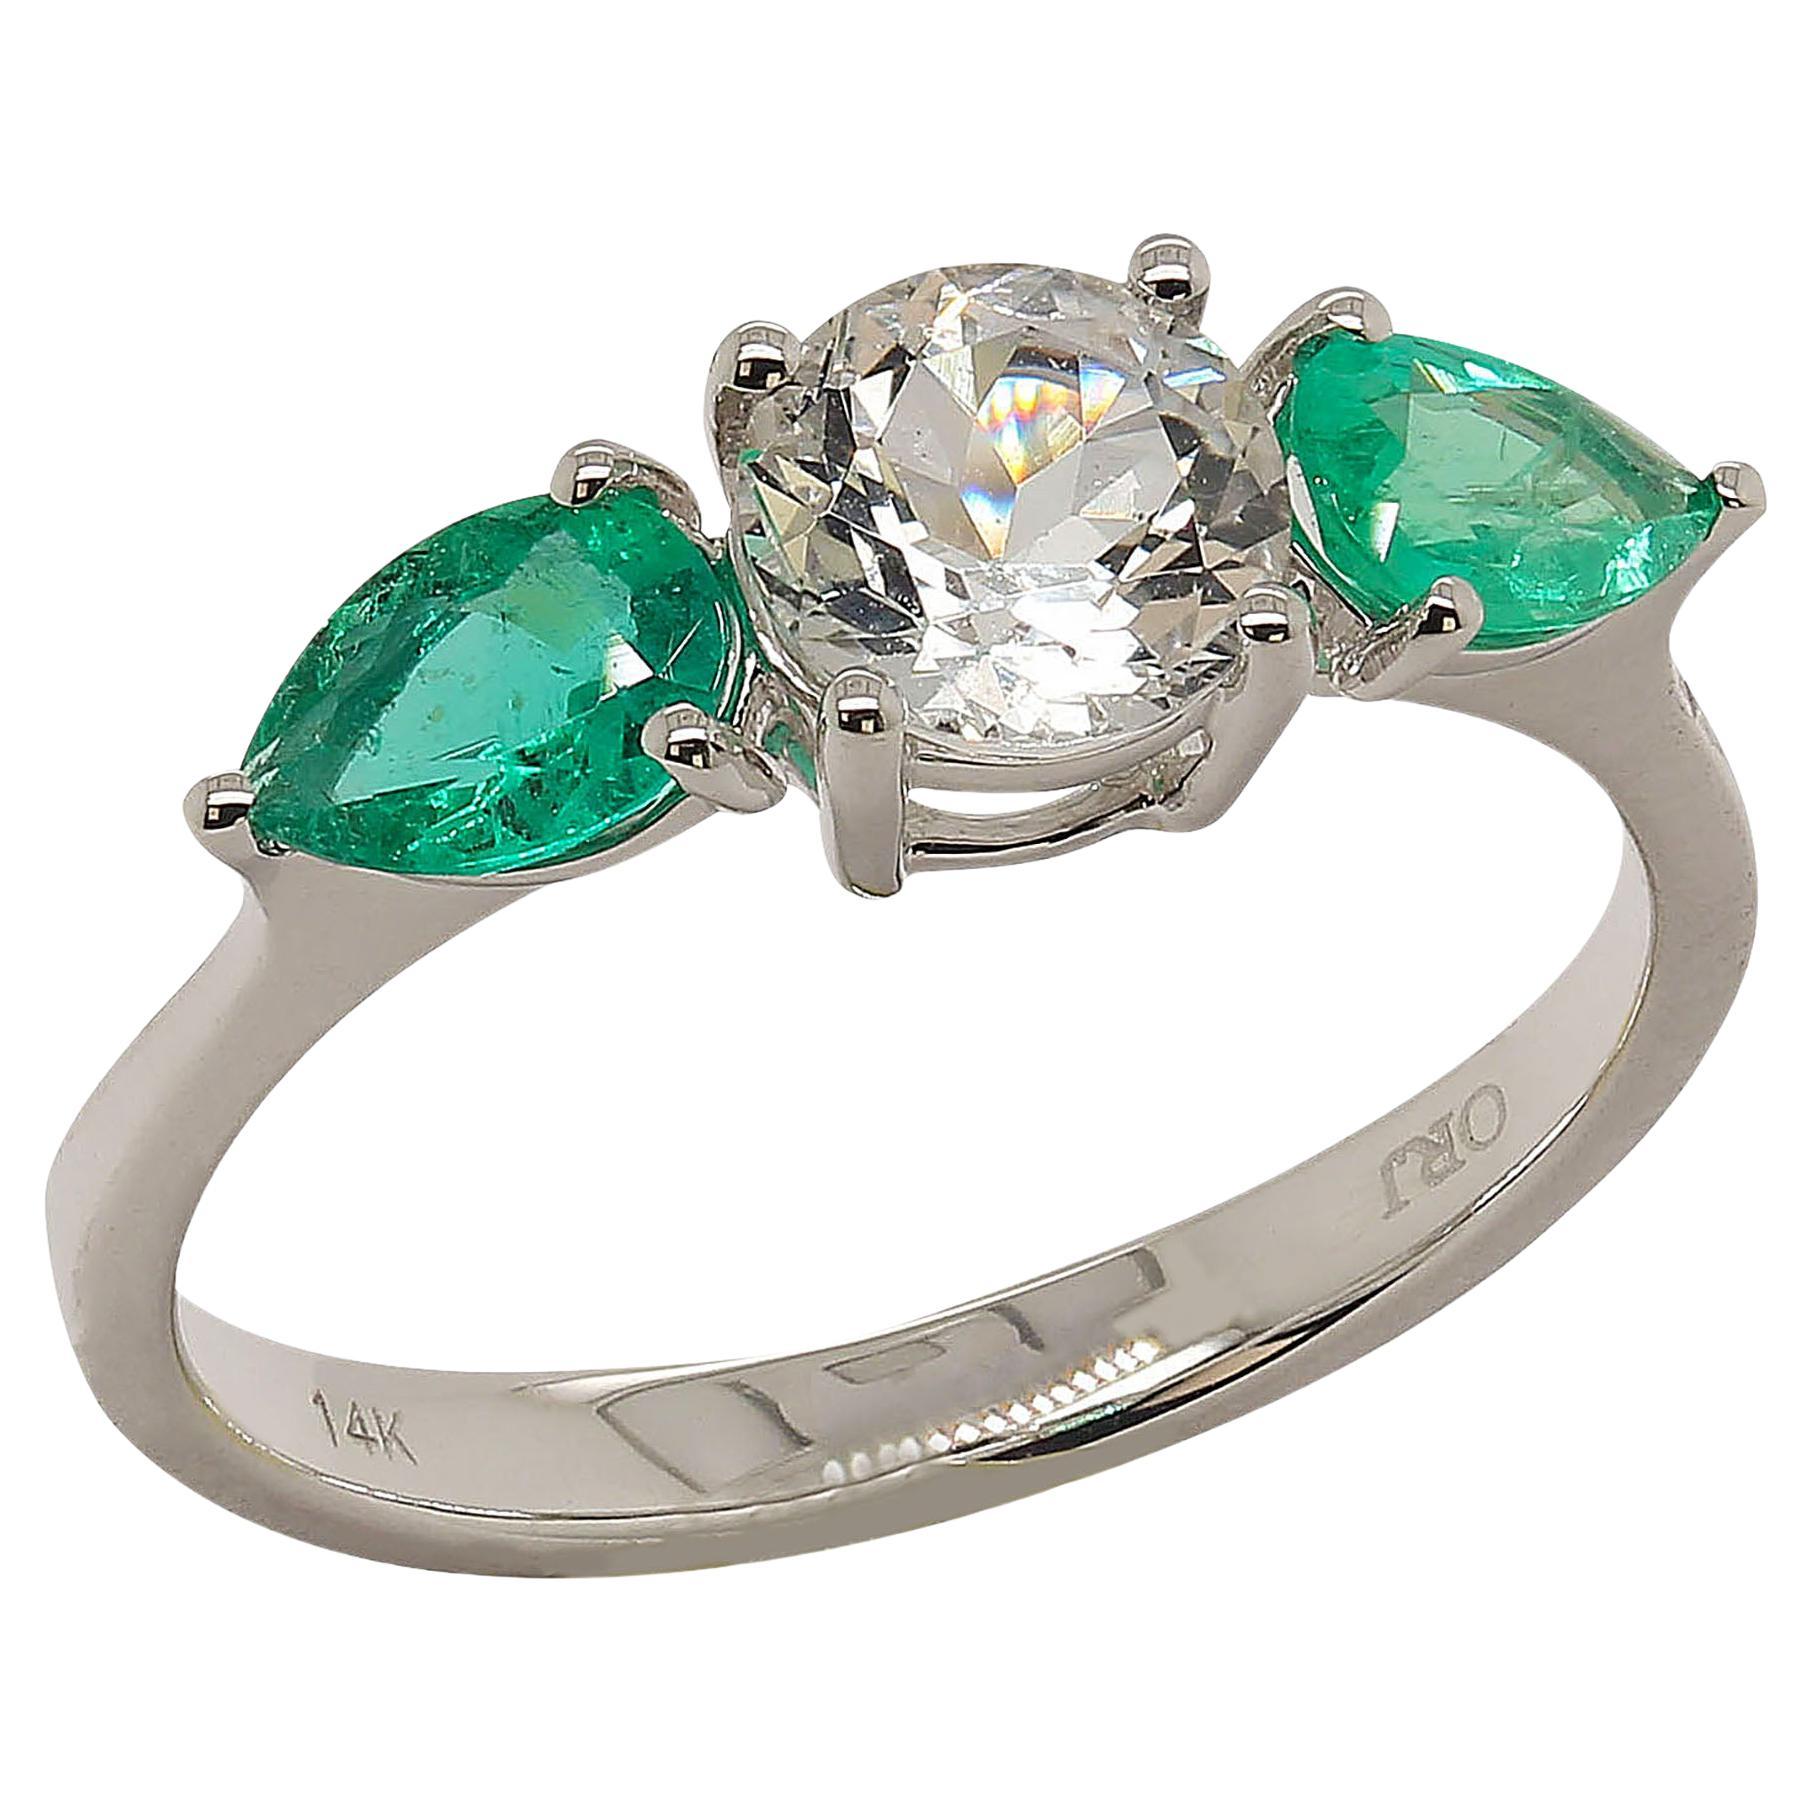 AJD Elegant Emerald and Silver Topaz Cocktail Ring  May Birthstone